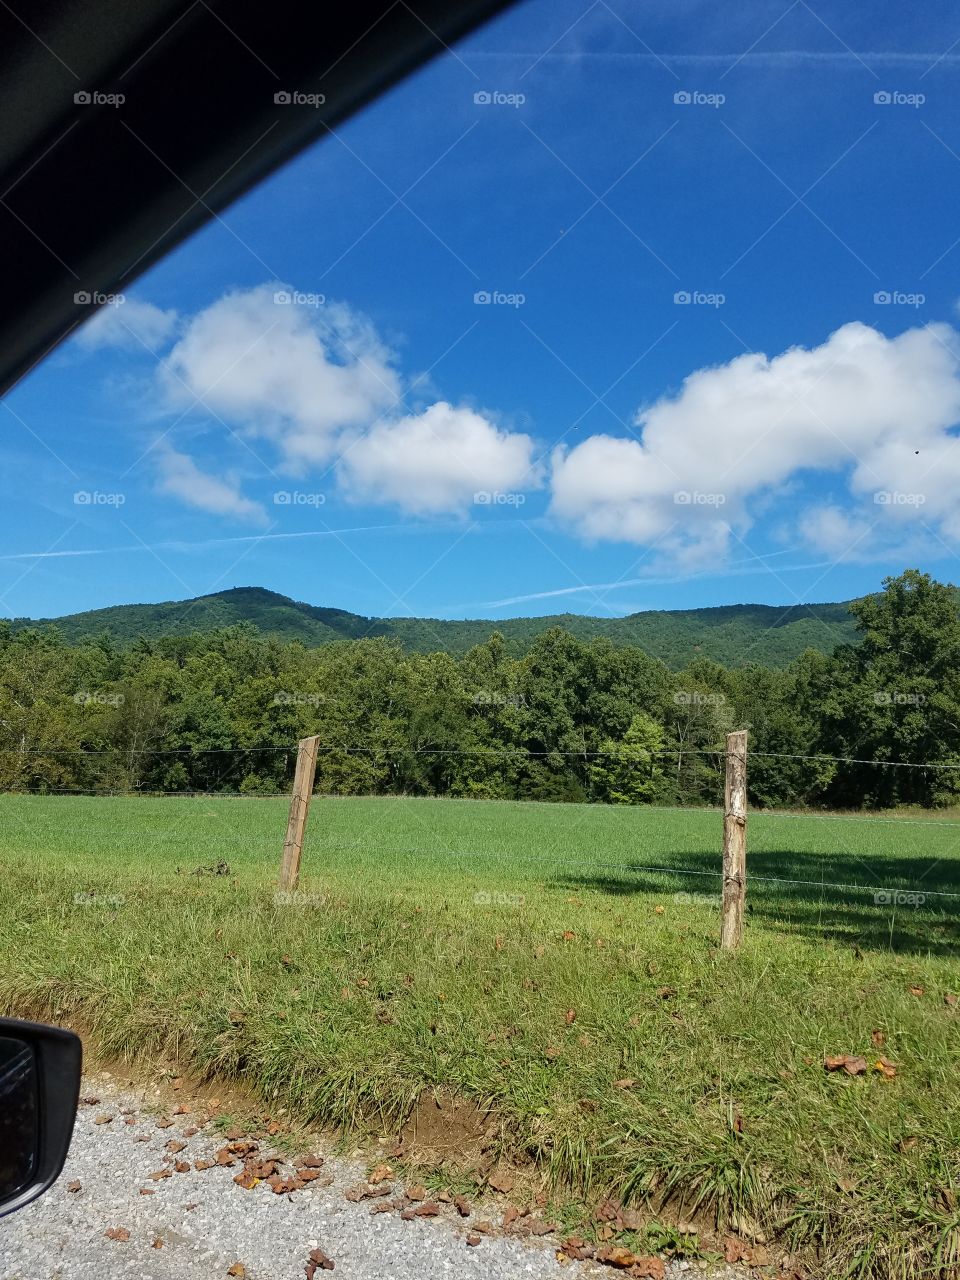 Mountains, trees, green grass, blue sky, clouds, wooden fence posts, beautiful, scenic